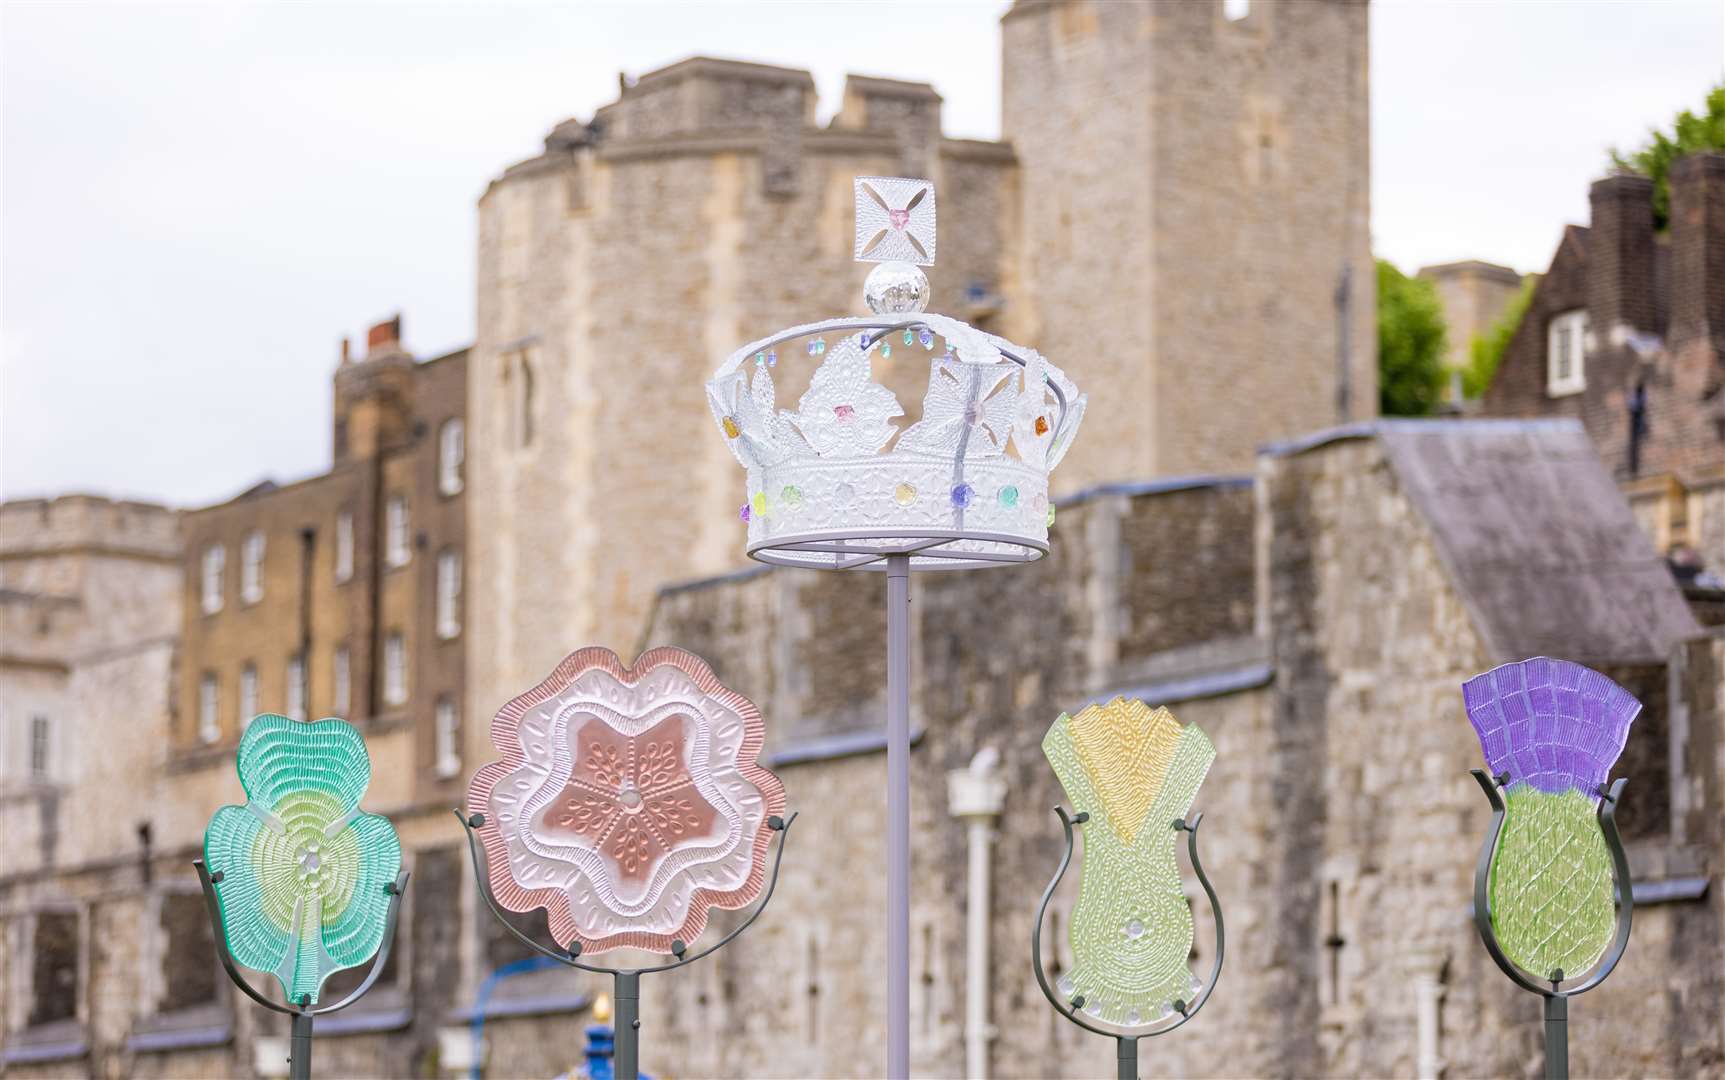 The artwork has been unveiled at the Queen's Garden in the Tower of London. Picture: Historic Royal Palaces